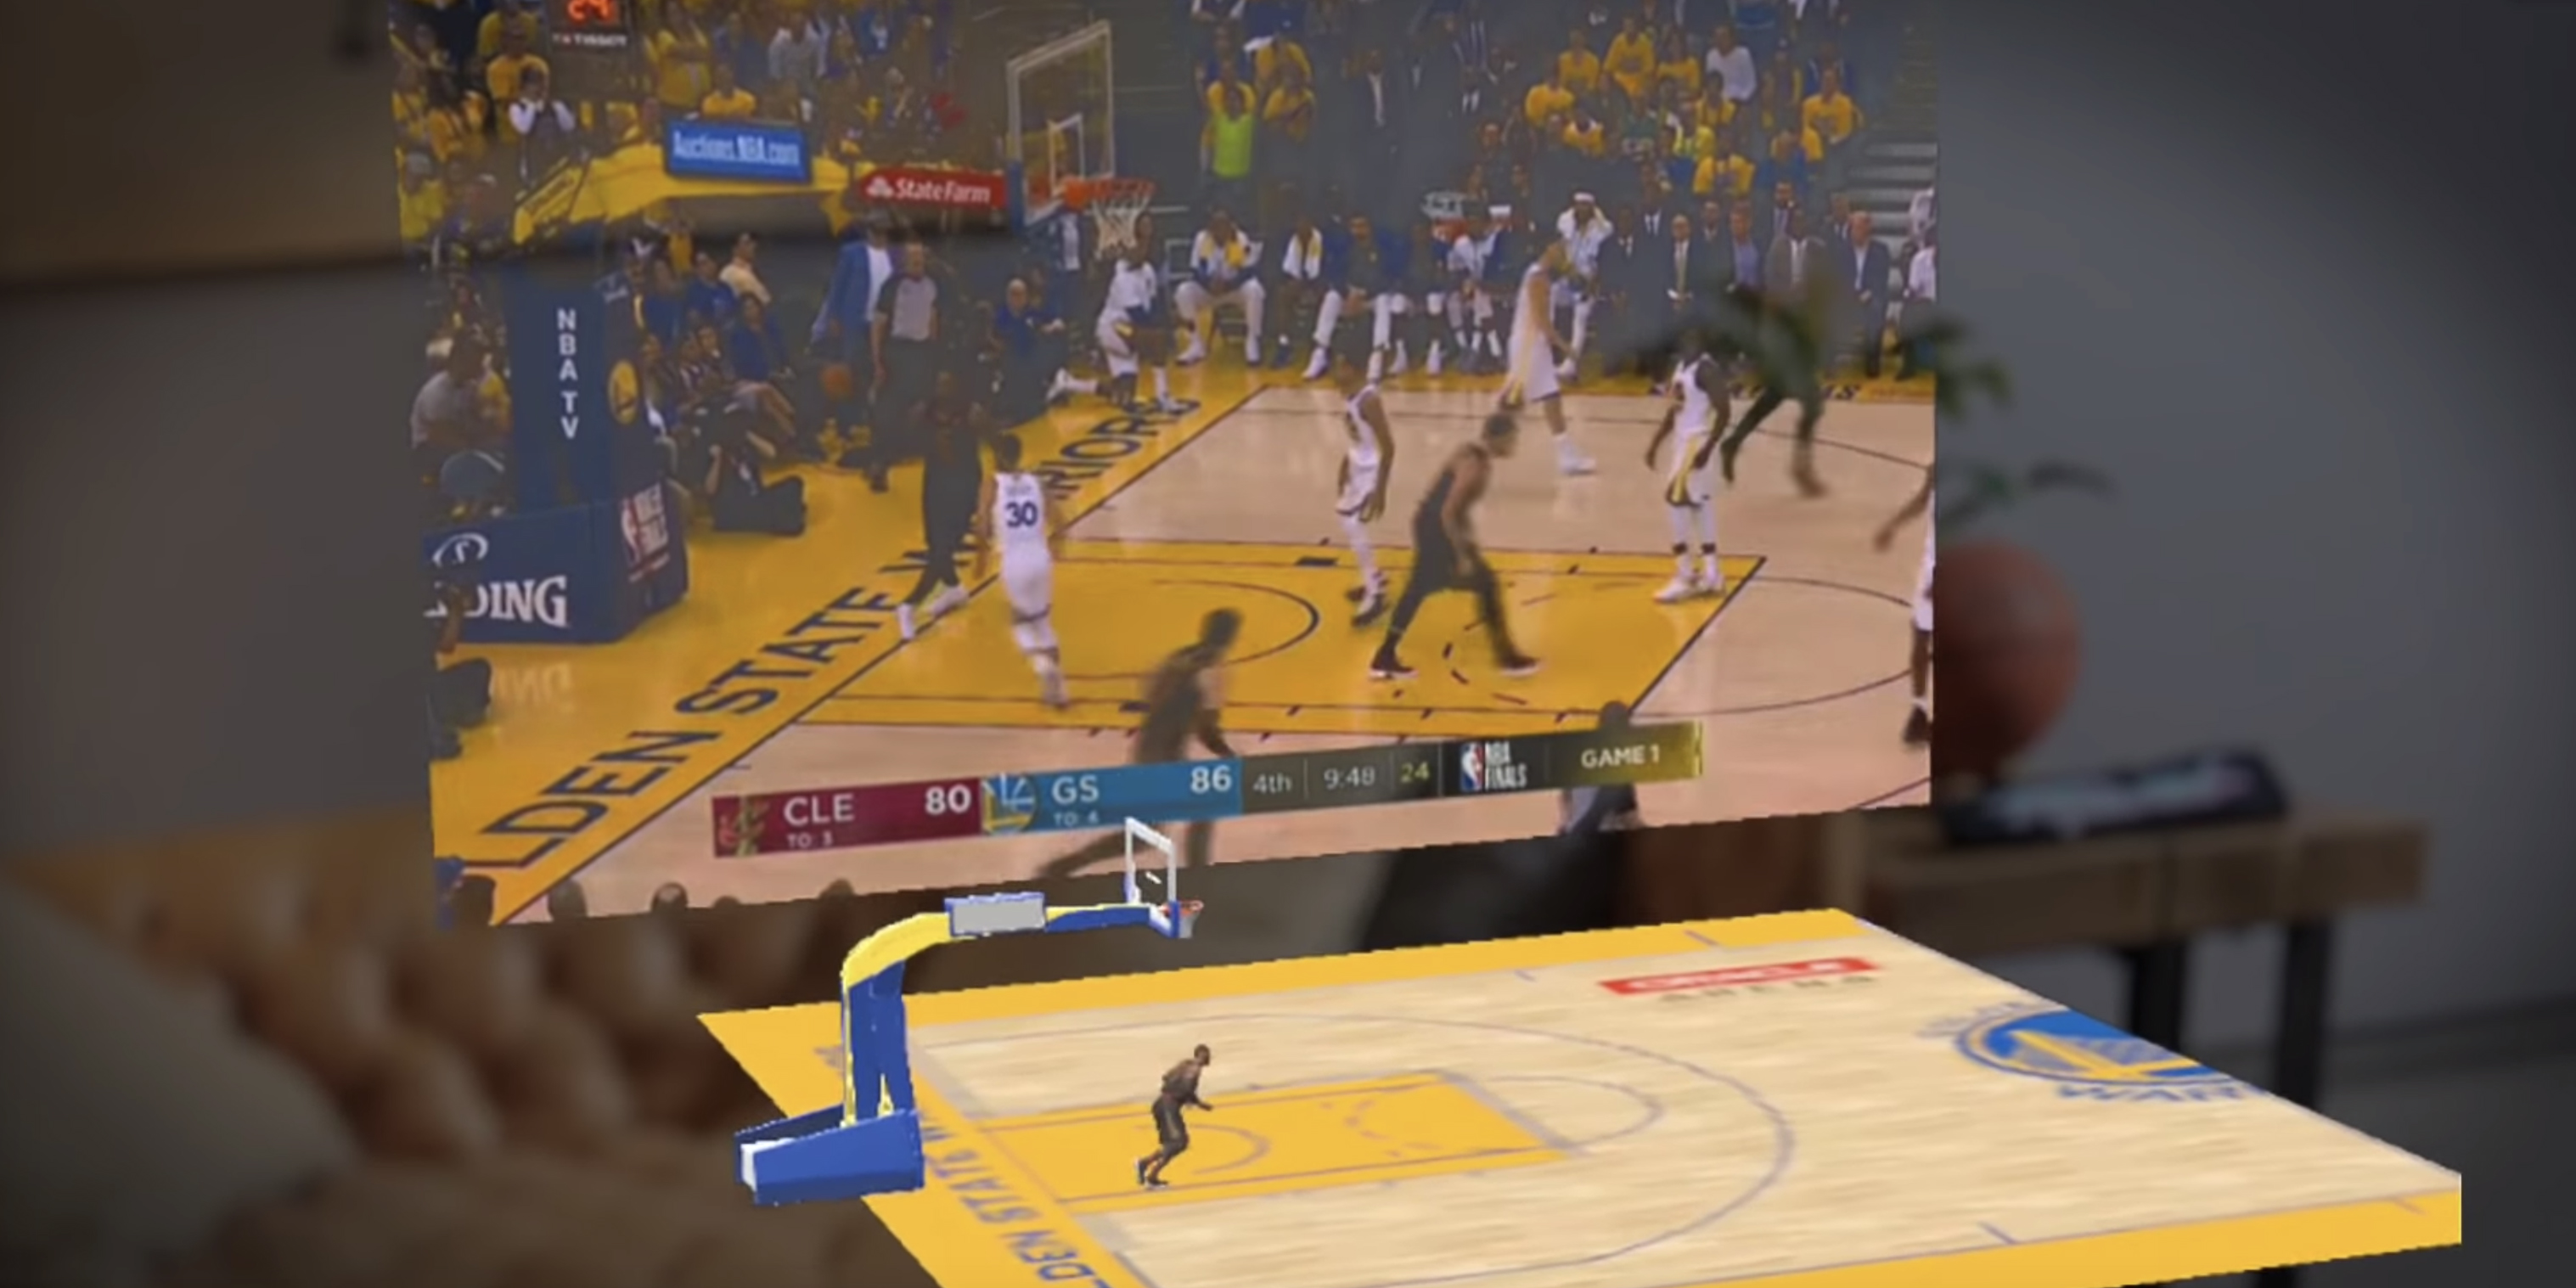 The Magic Leap NBA App hits with a fully immersive experience - 9to5Toys